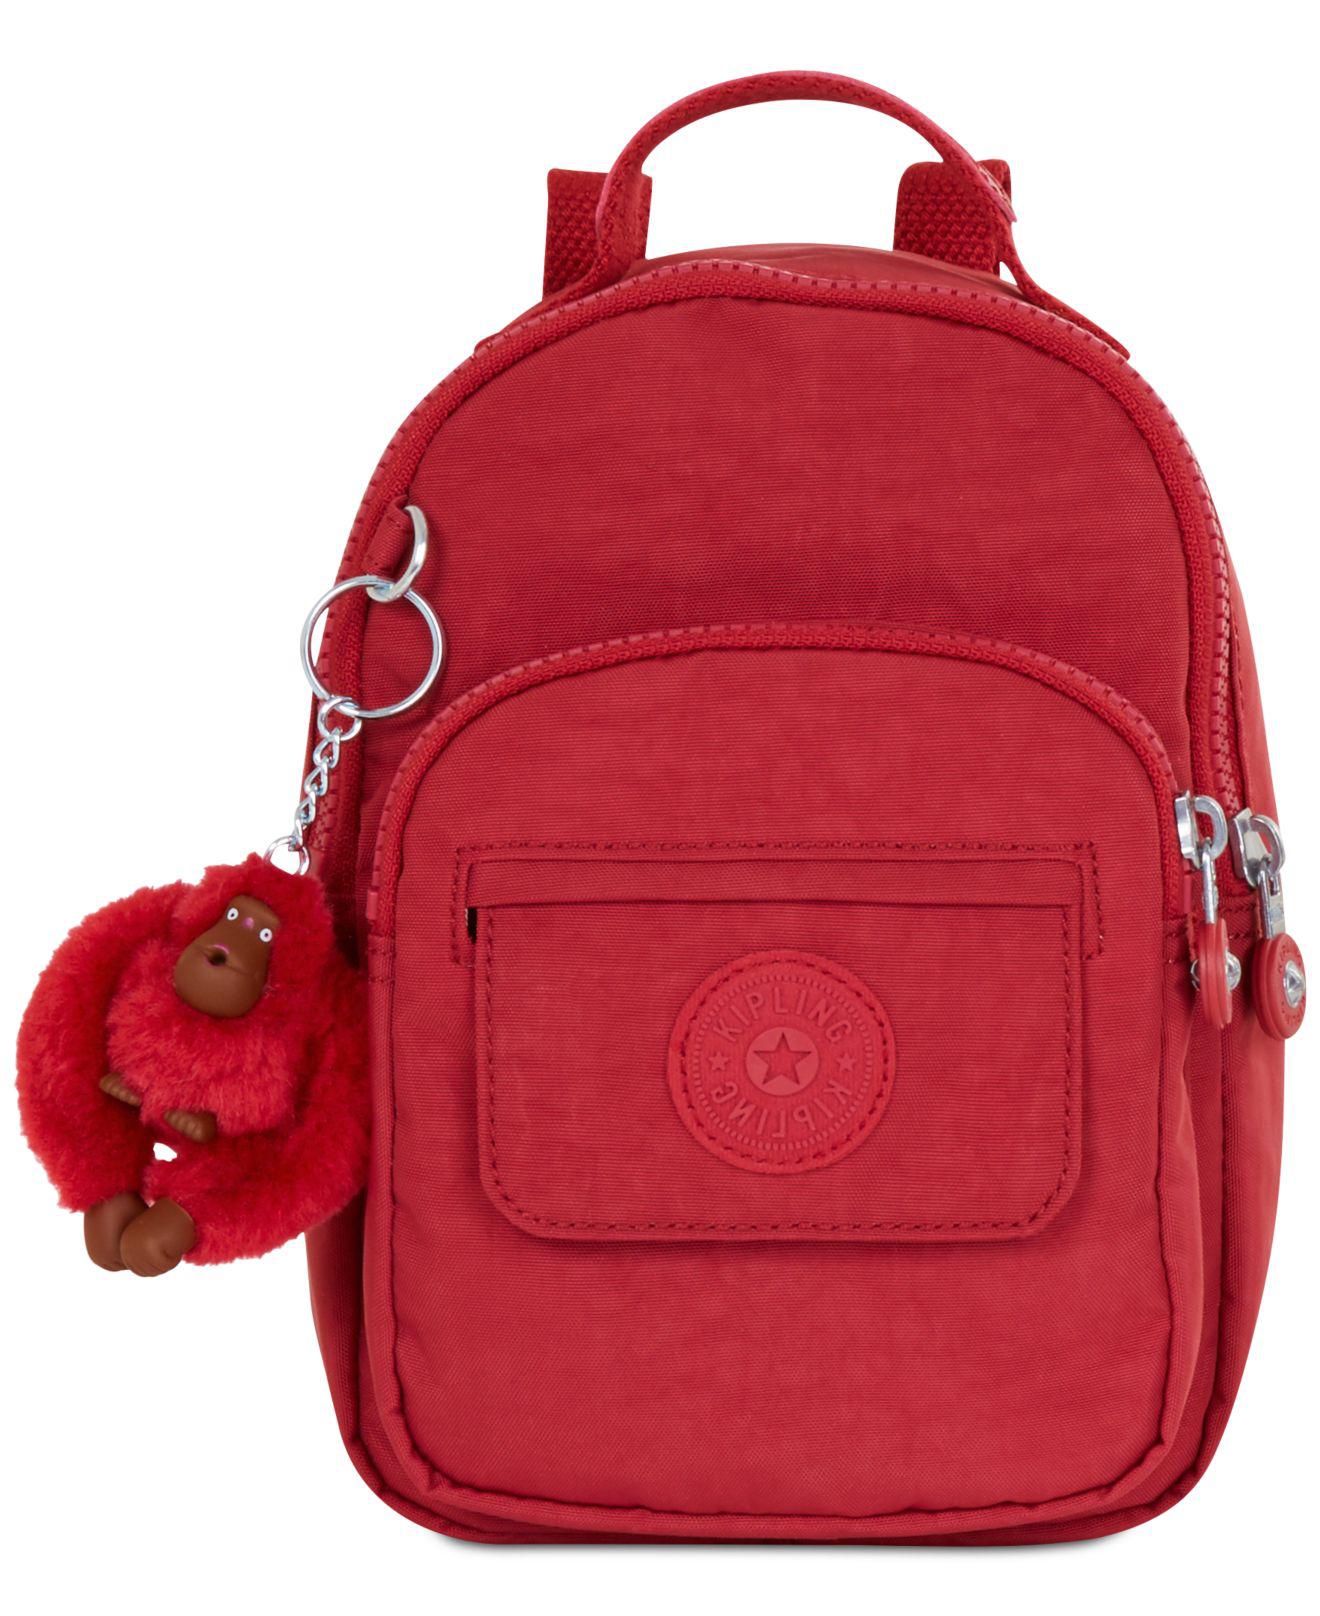 Kipling Synthetic Alber Mini Backpack in Red - Lyst